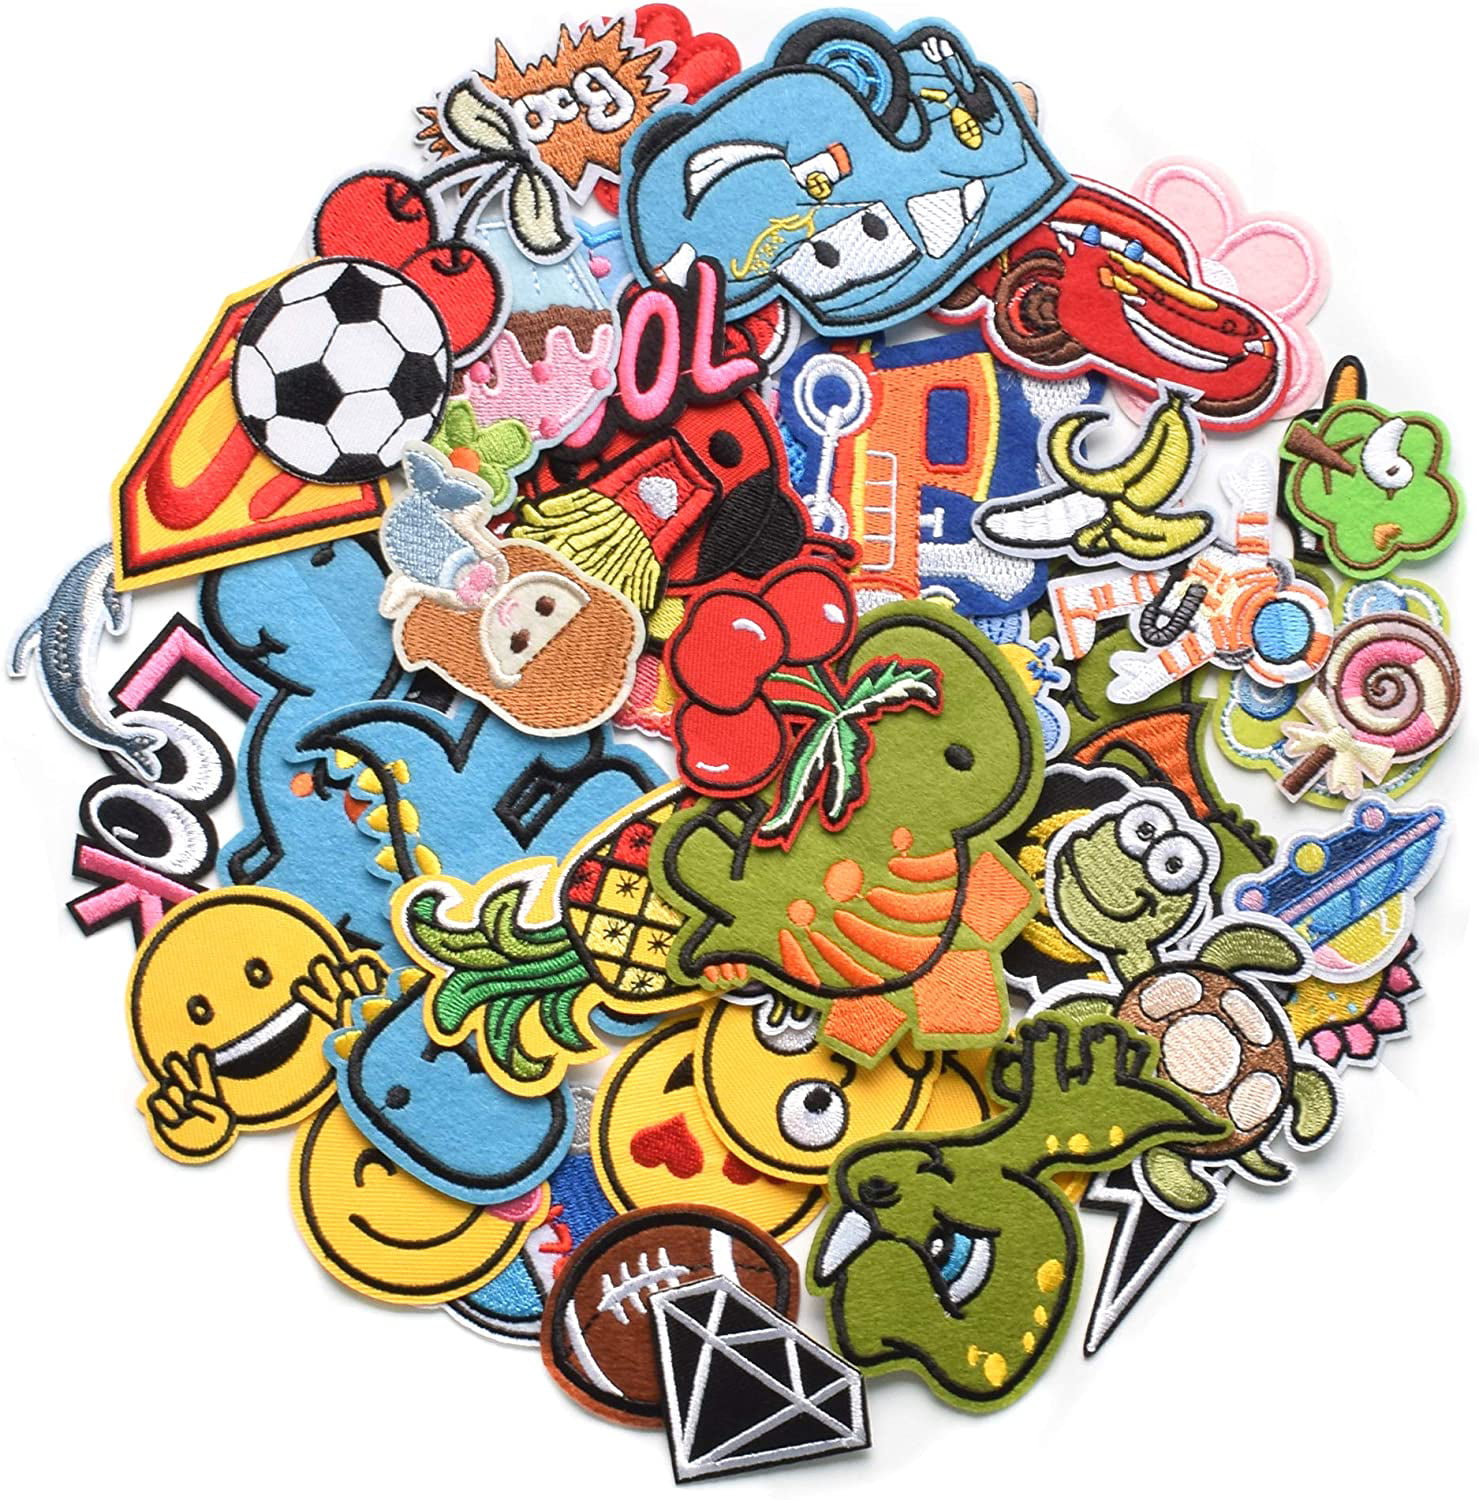 80 Popular DIY Cartoon Embroidered Iron On Badges For Bags, Clothes, Hat  Patches, And Ornaments From Lqbyc, $34.37